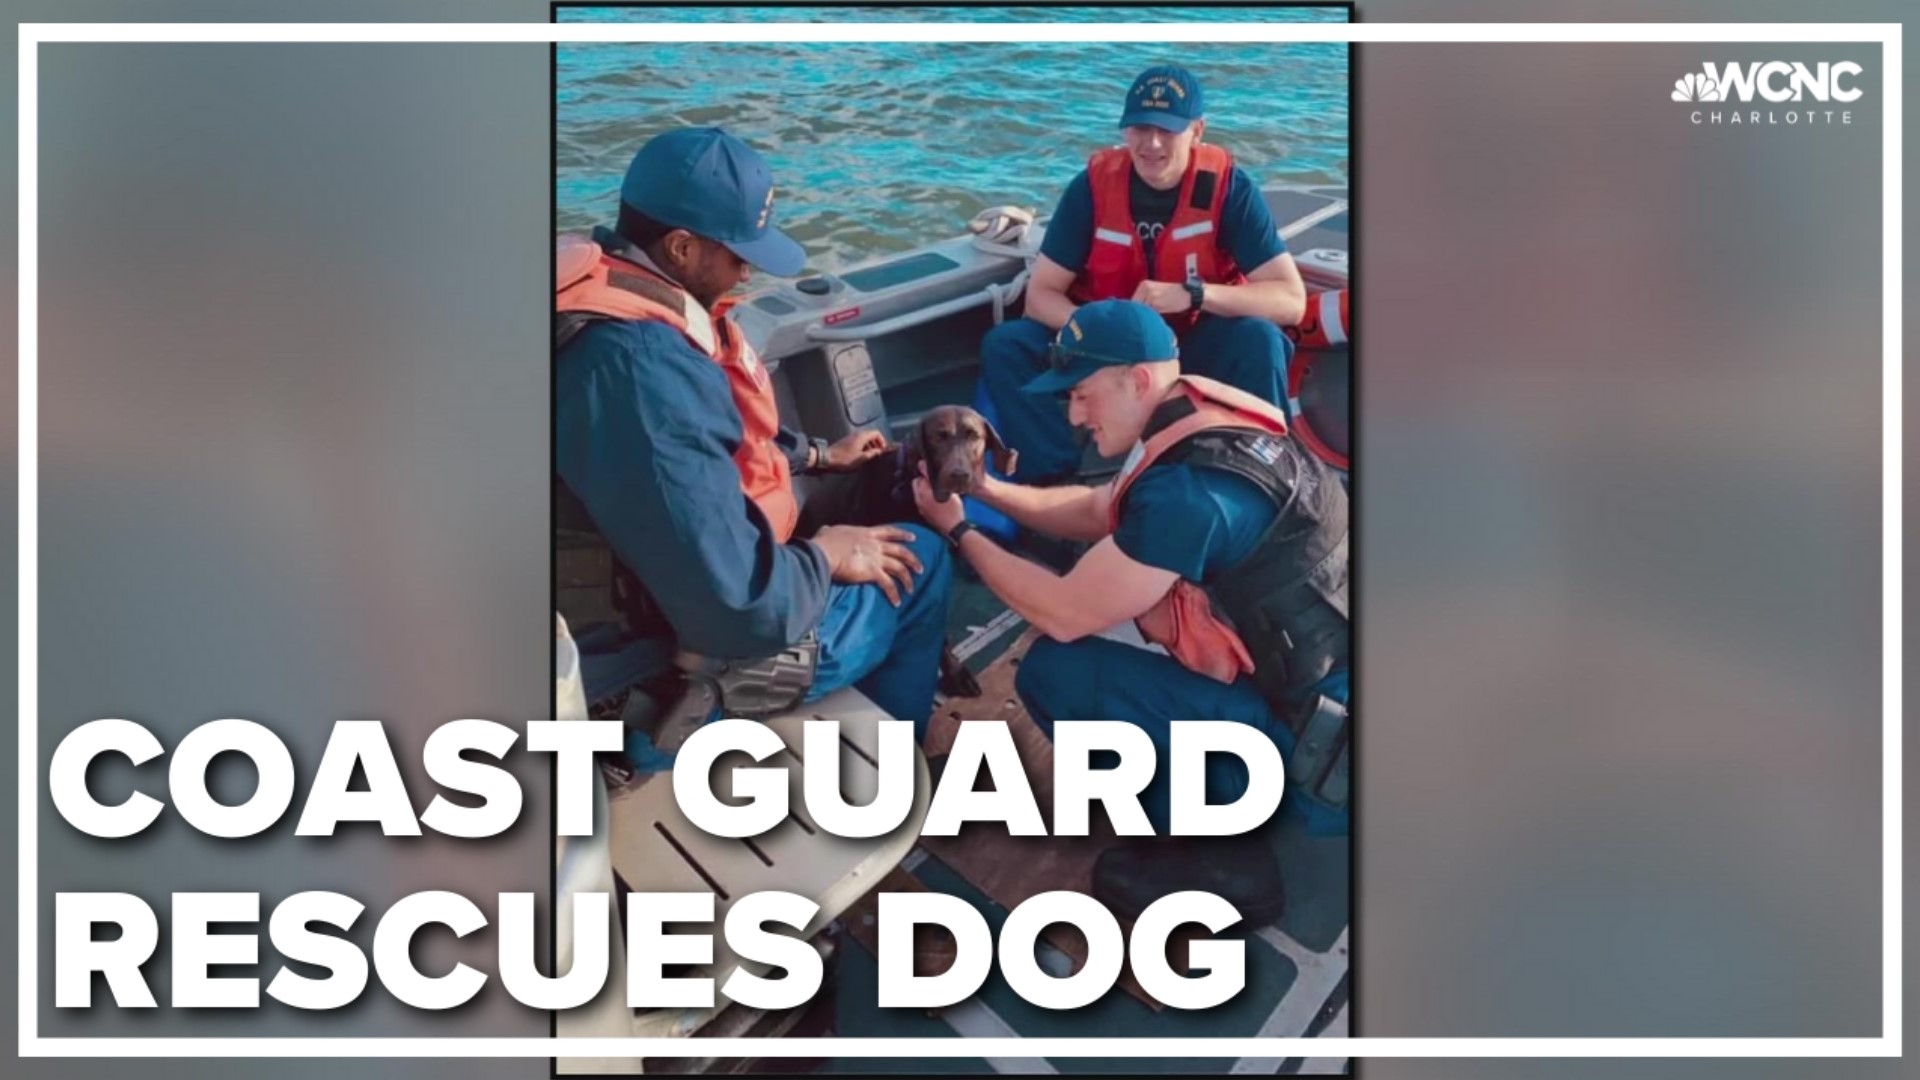 A dog that went overboard in Pamlico Sound off the North Carolina coast was rescued by the U.S. Coast Guard Saturday, officials said.